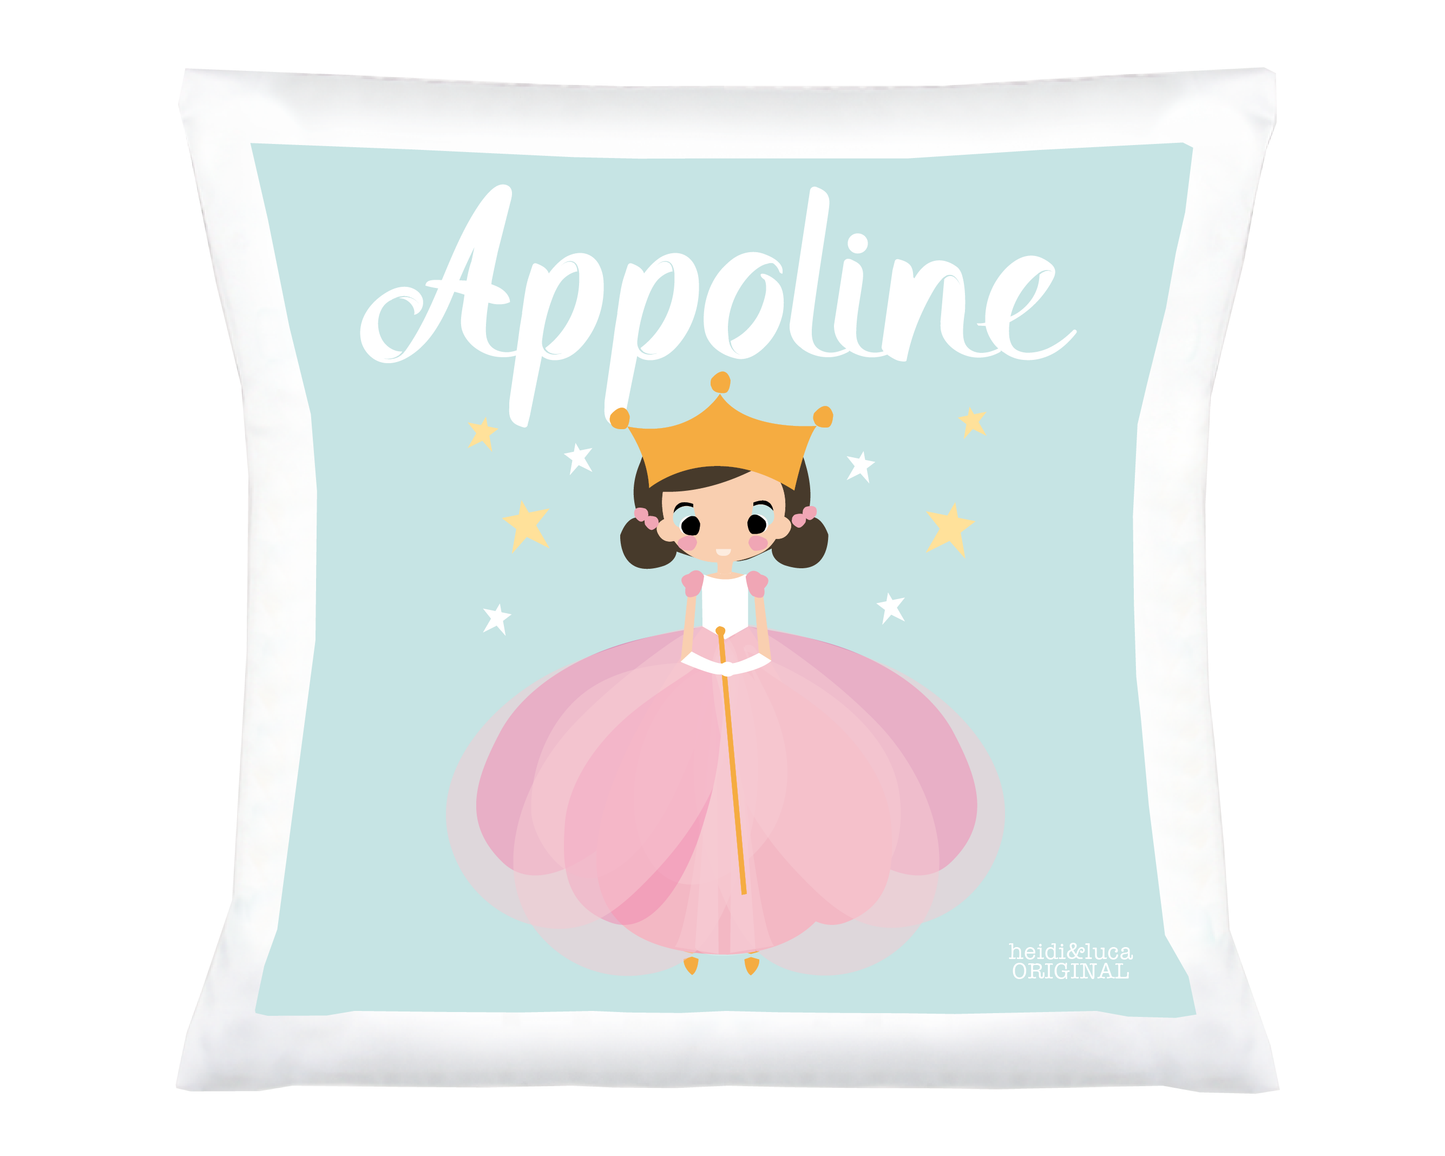 Appoline Cushion Cover